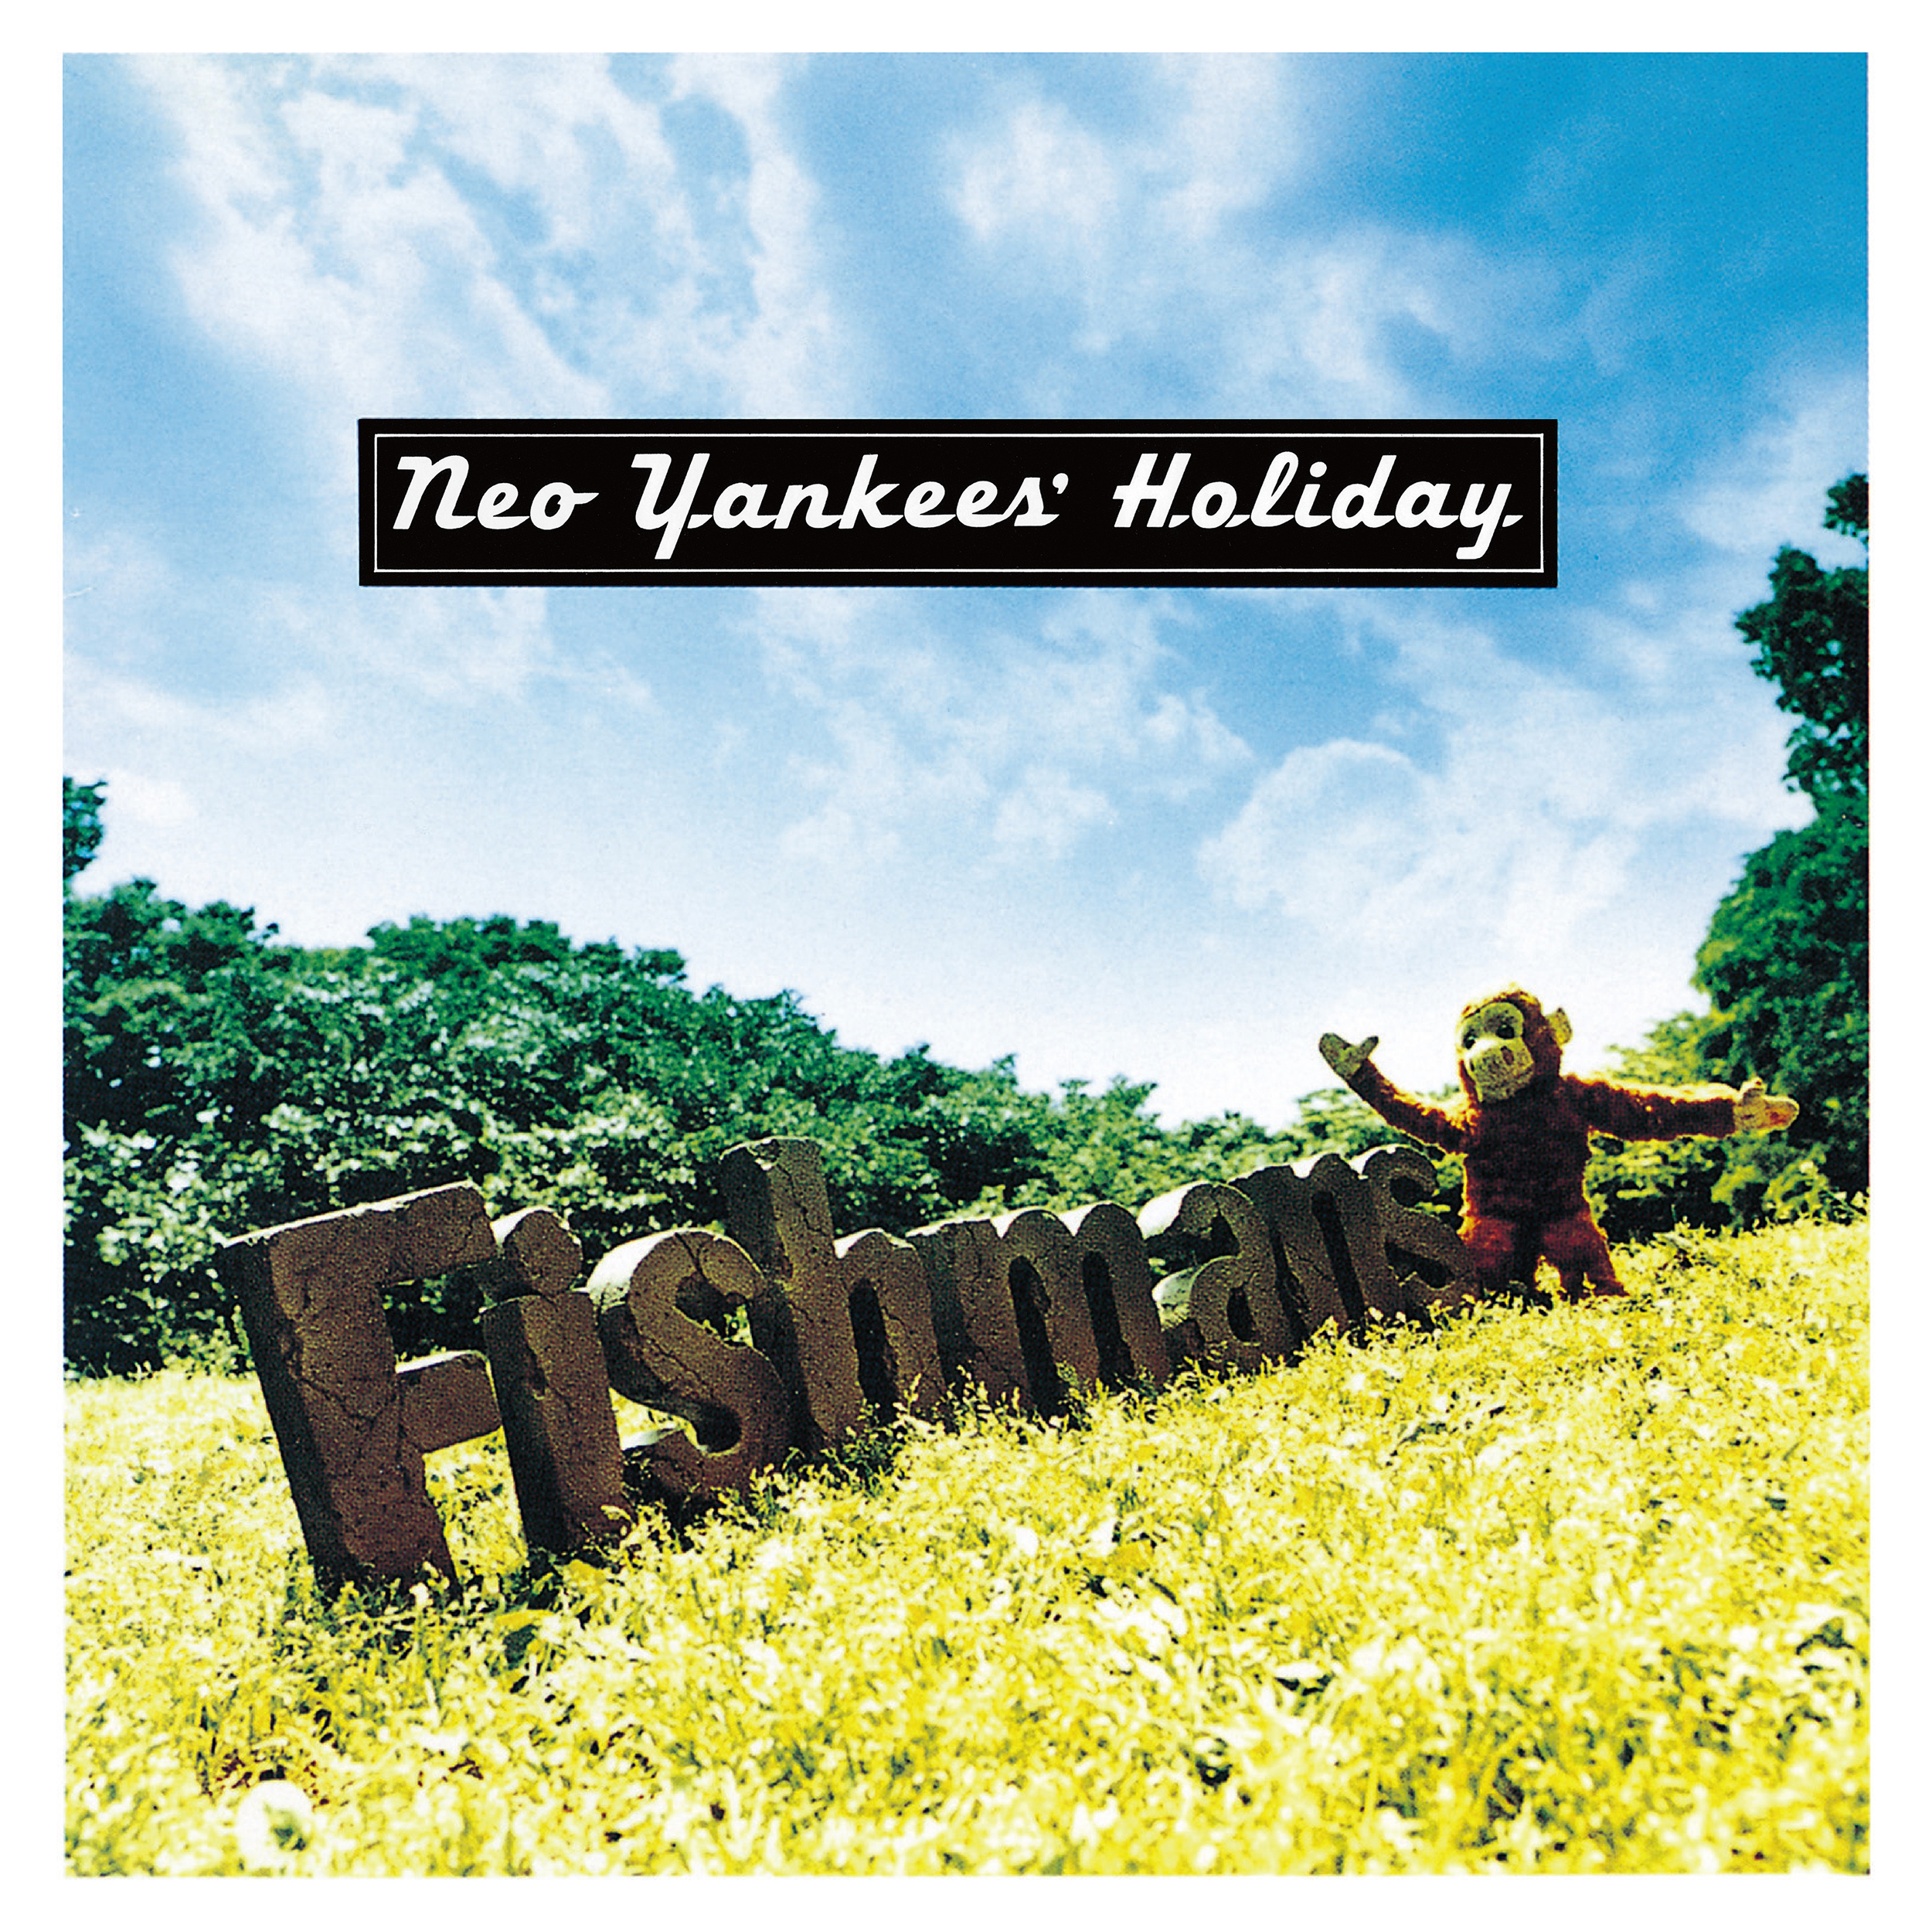 Fishmans "Neo Yankees’ Holiday" LP record (180g heavyweight vinyl) 2-disc set Release on Aug4th 2021